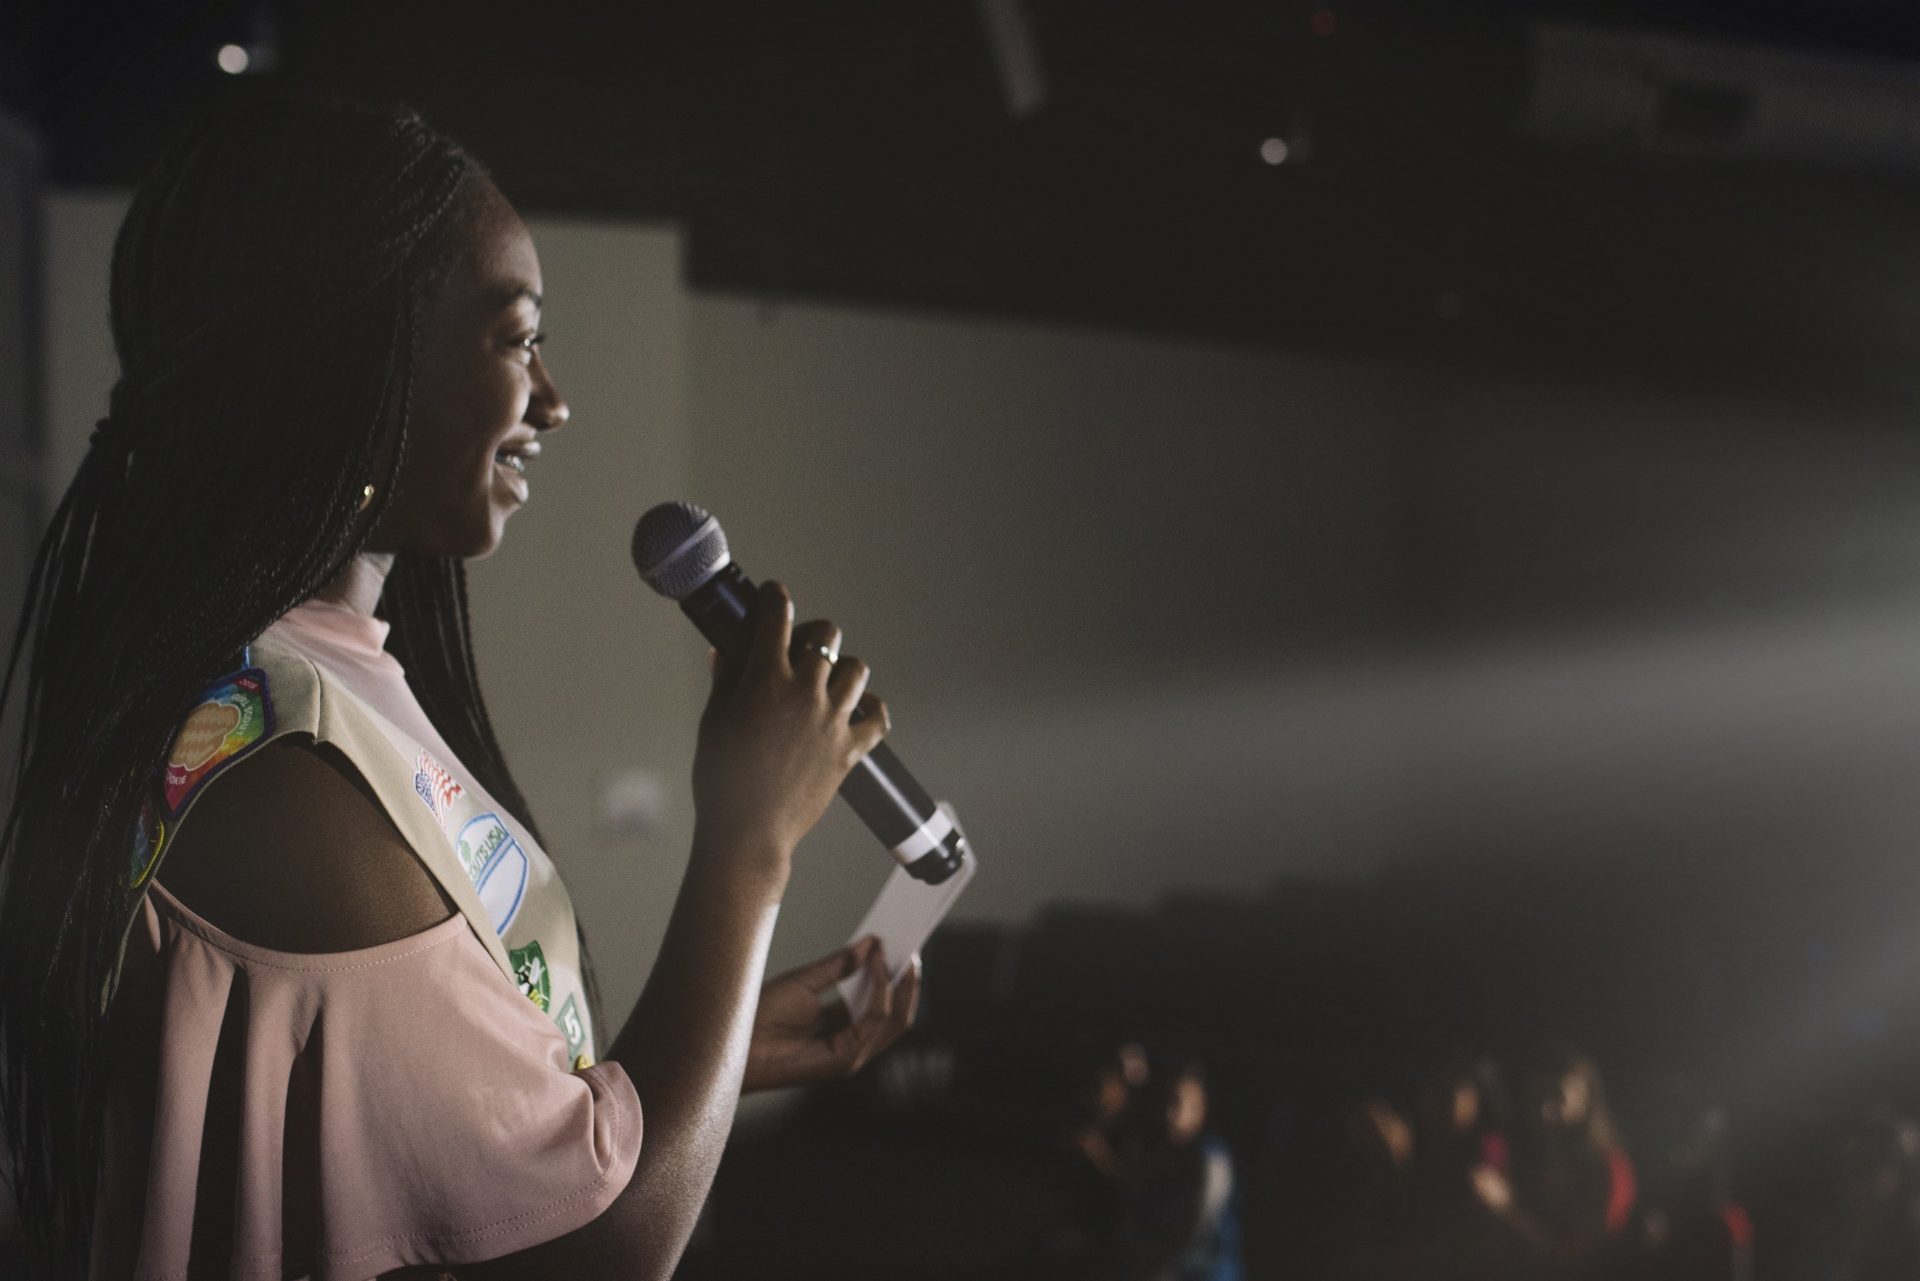 Girl Scout speaking into a microphone in front of an audience